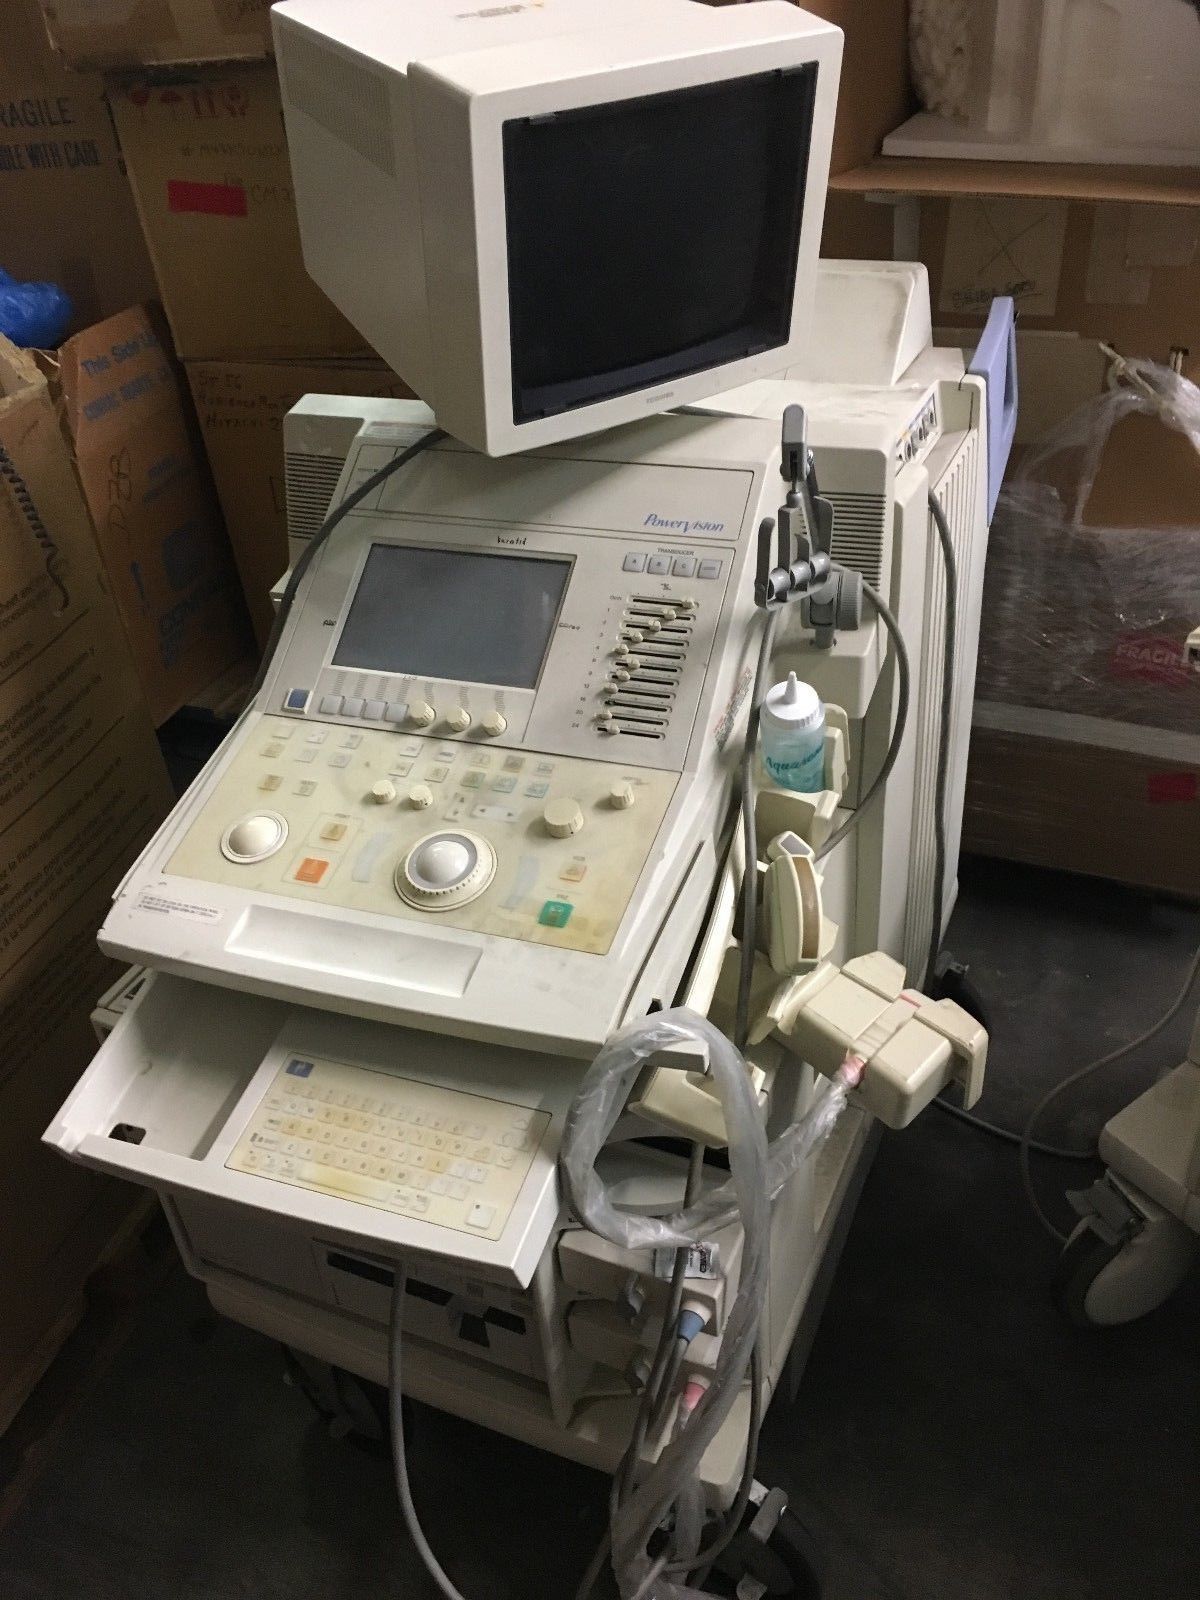 Lot of 2 TOSHIBA PowerVision 8000 ULTRASOUND and TOSHIBA PowerVision DIAGNOSTIC ULTRASOUND MACHINES FOR SALE